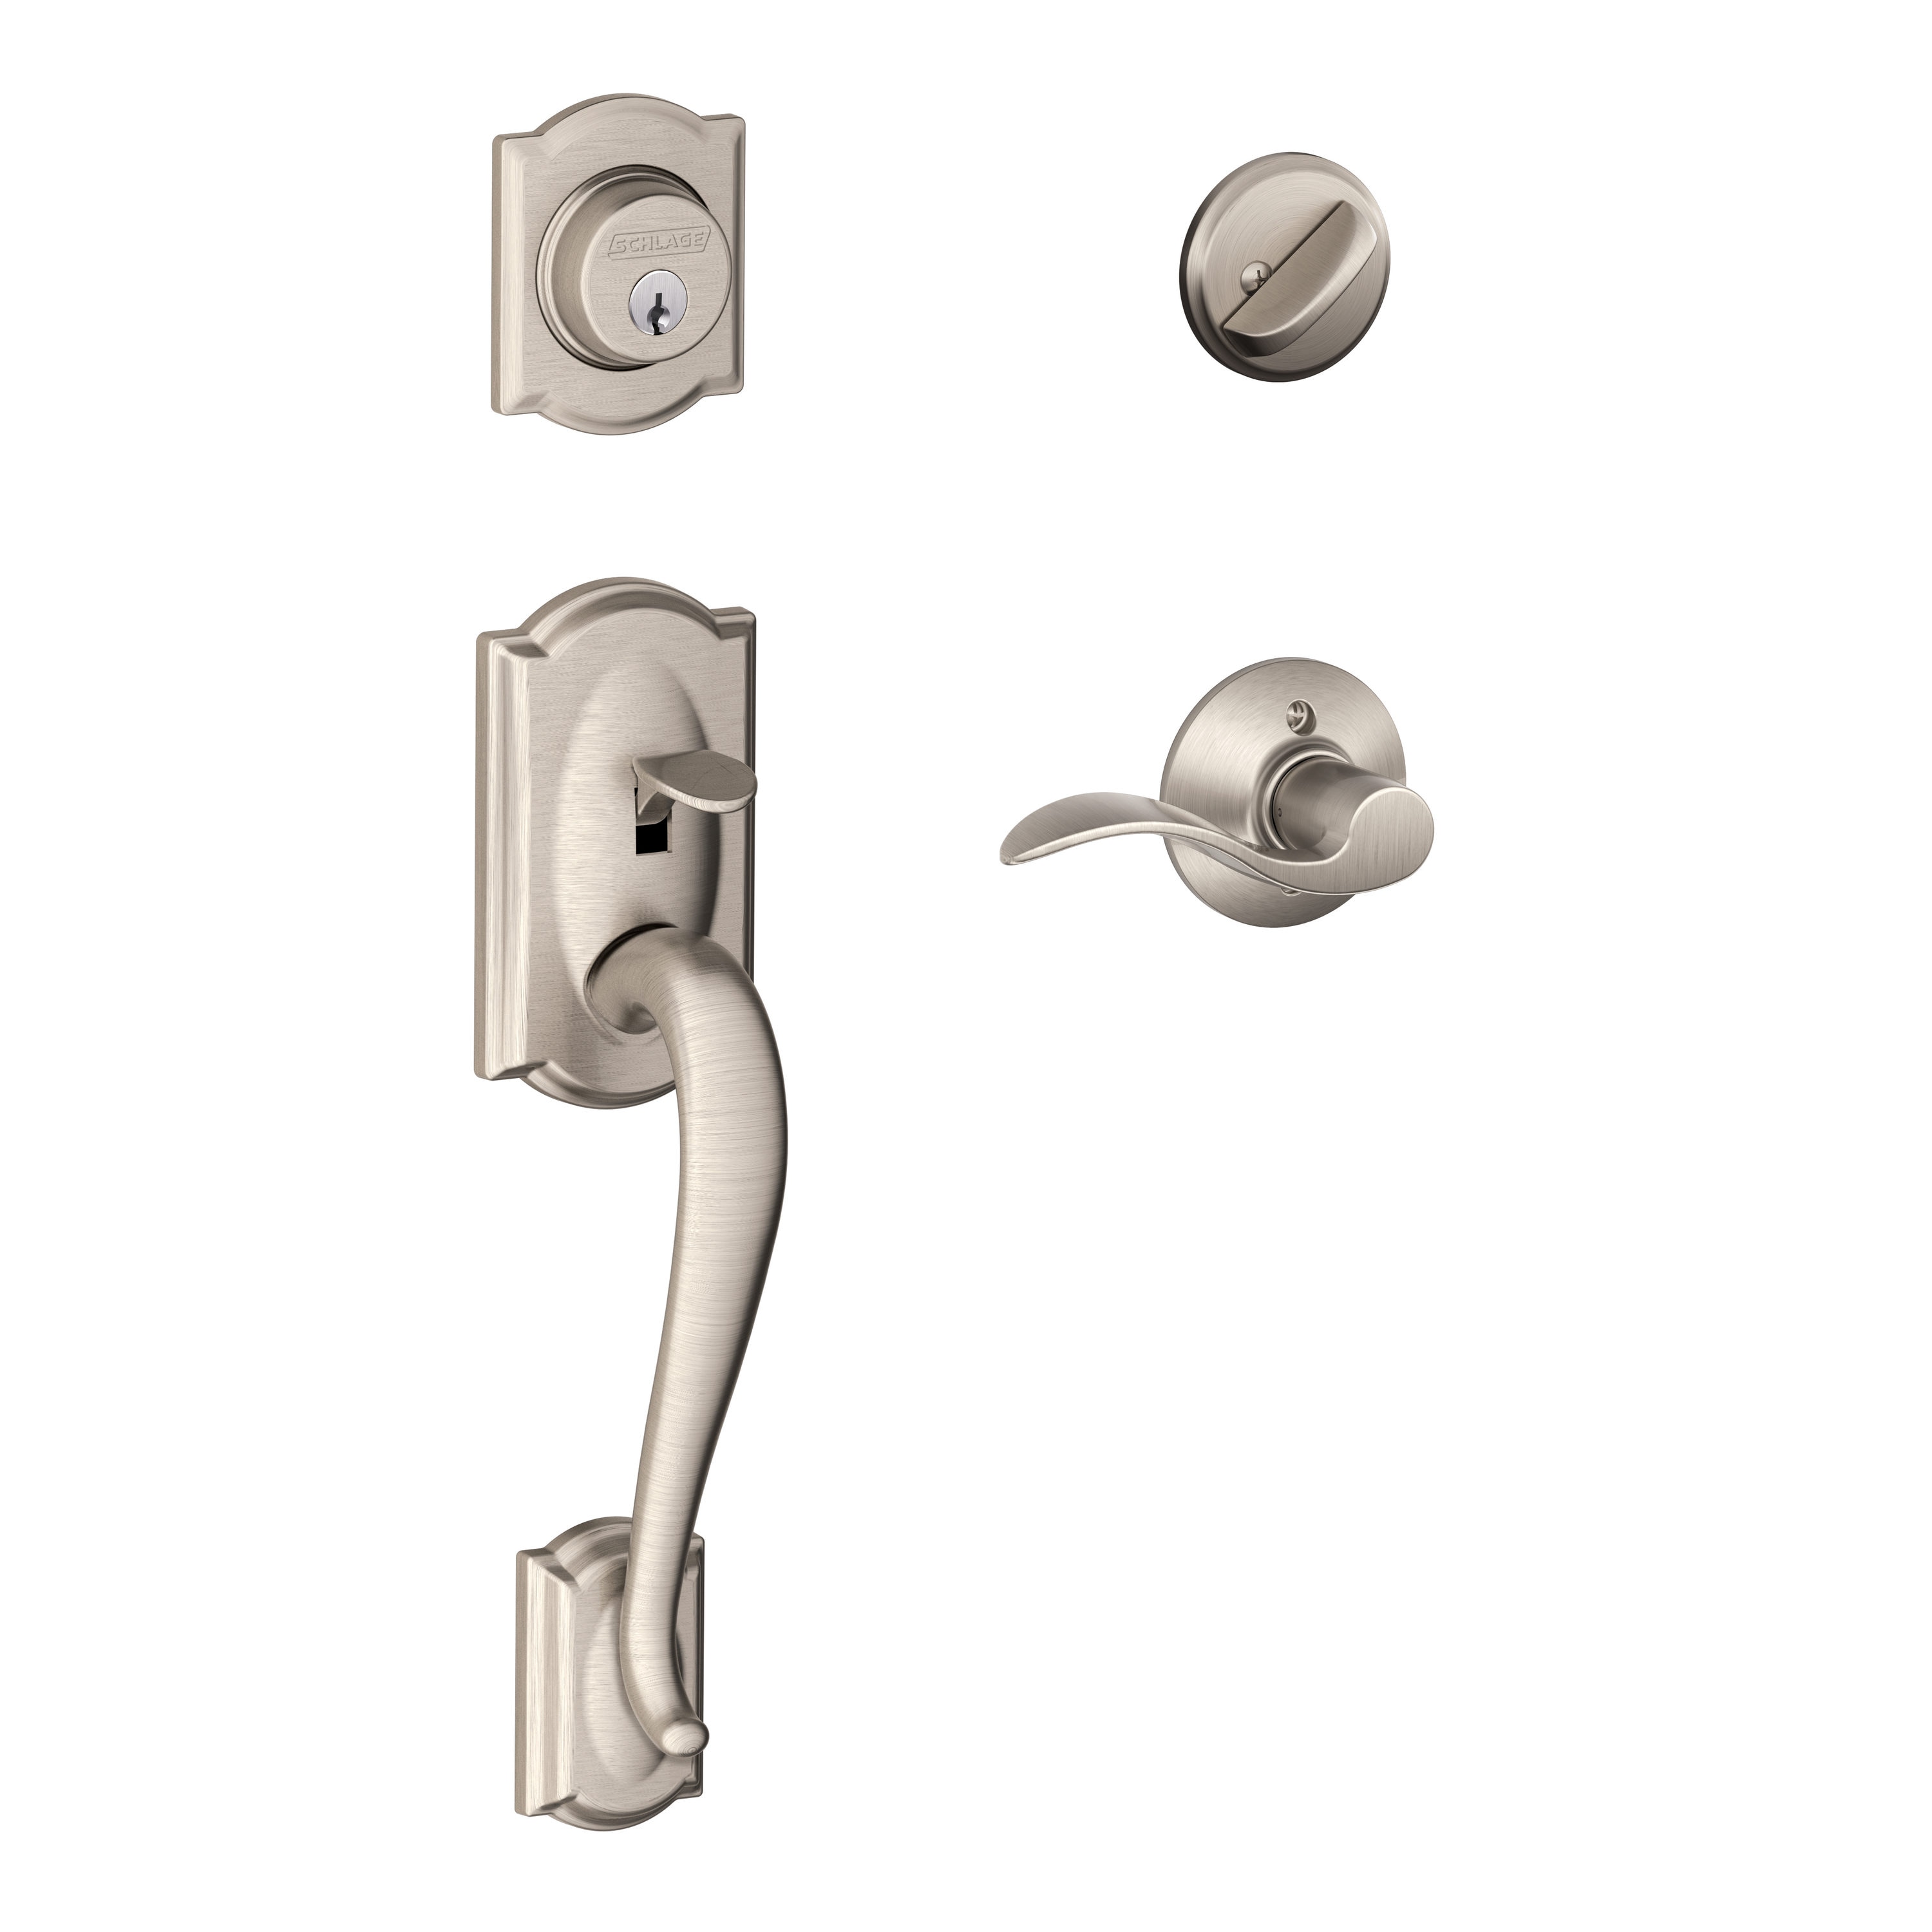 Shop Schlage Accent Satin Nickel Collection at Lowes.com